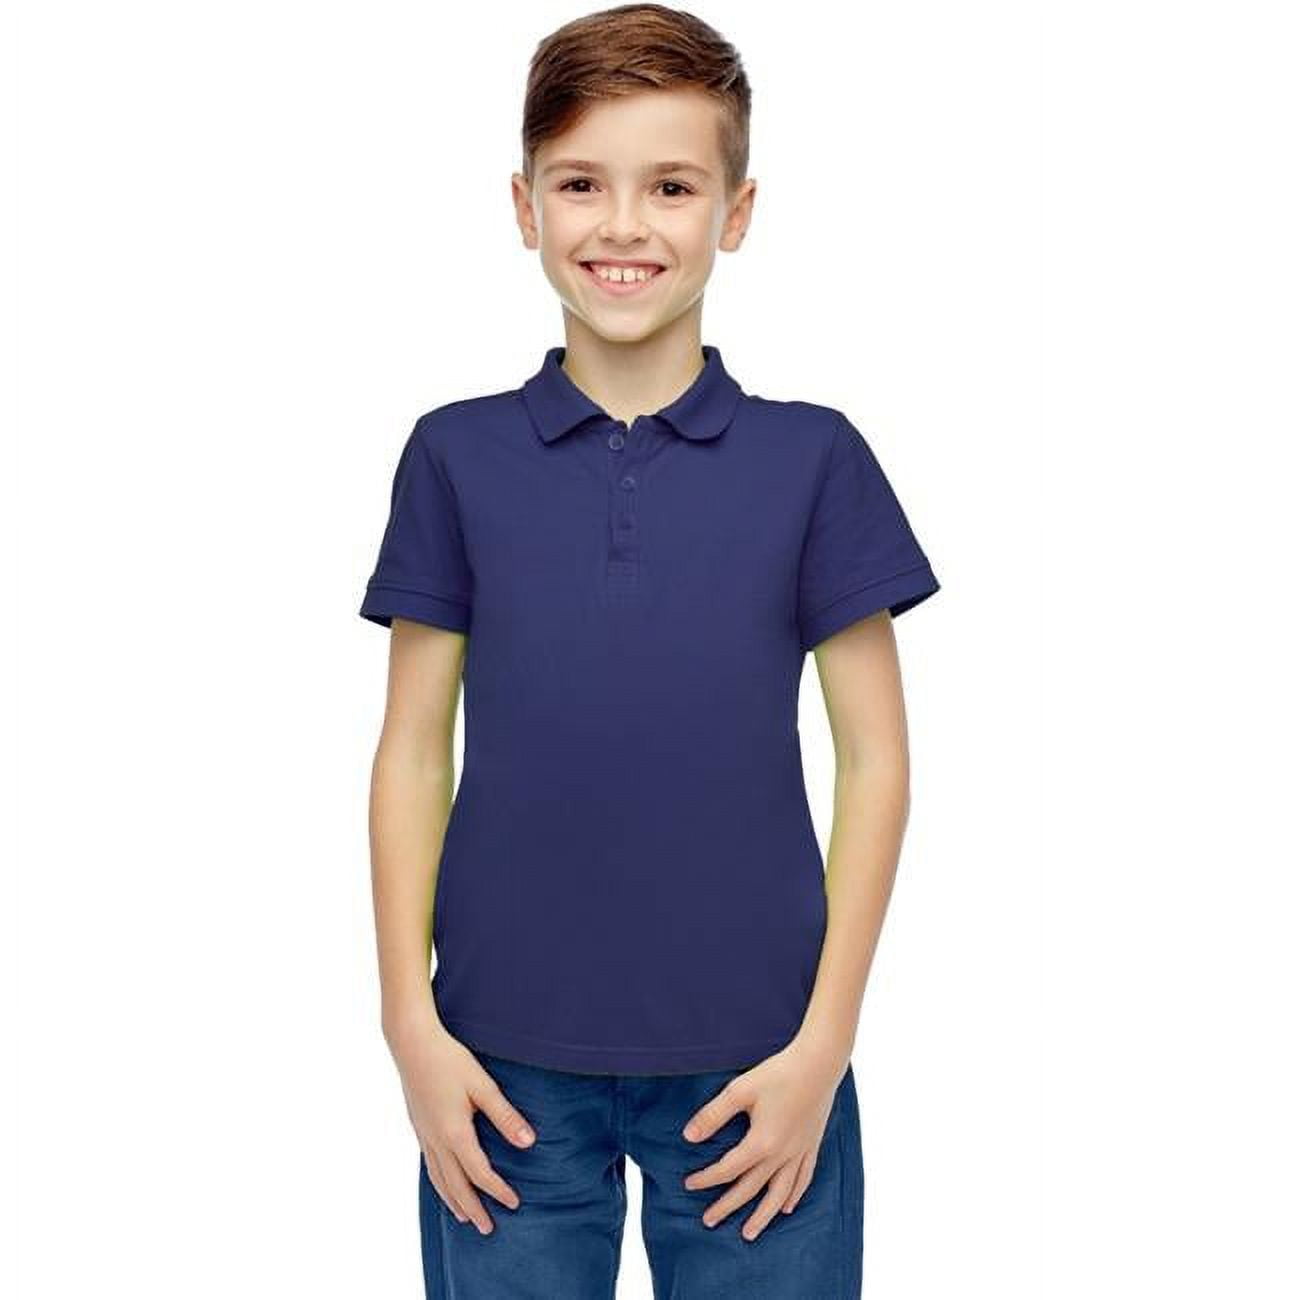 2267010 Toddlers Short Sleeve Navy Polo Shirts, Case Of 36 - Size 2t-4t